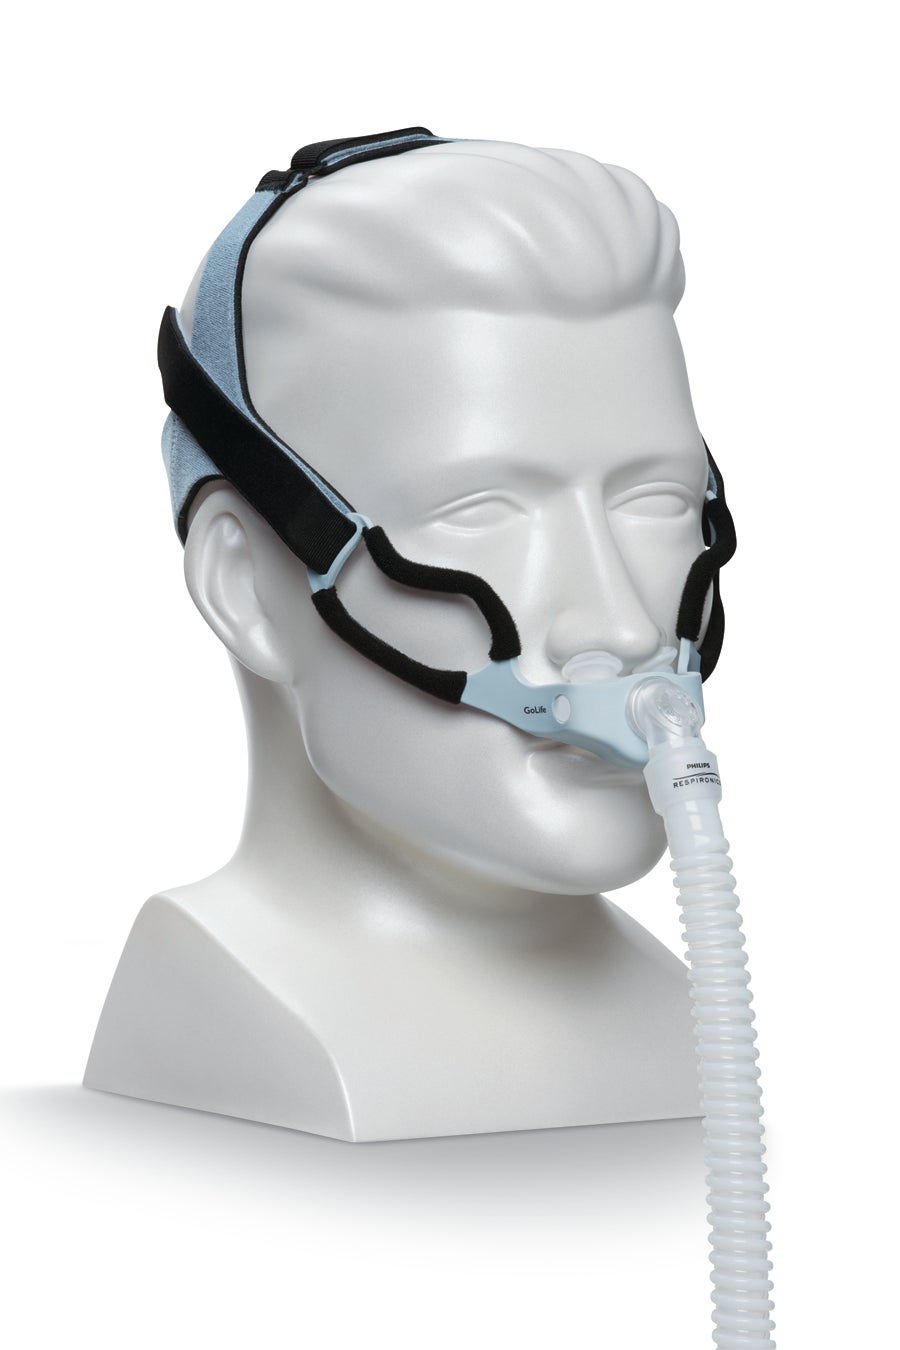 Philips Respironics Golife For Men Nasal Pillow Cpap Mask With Headgear 7948